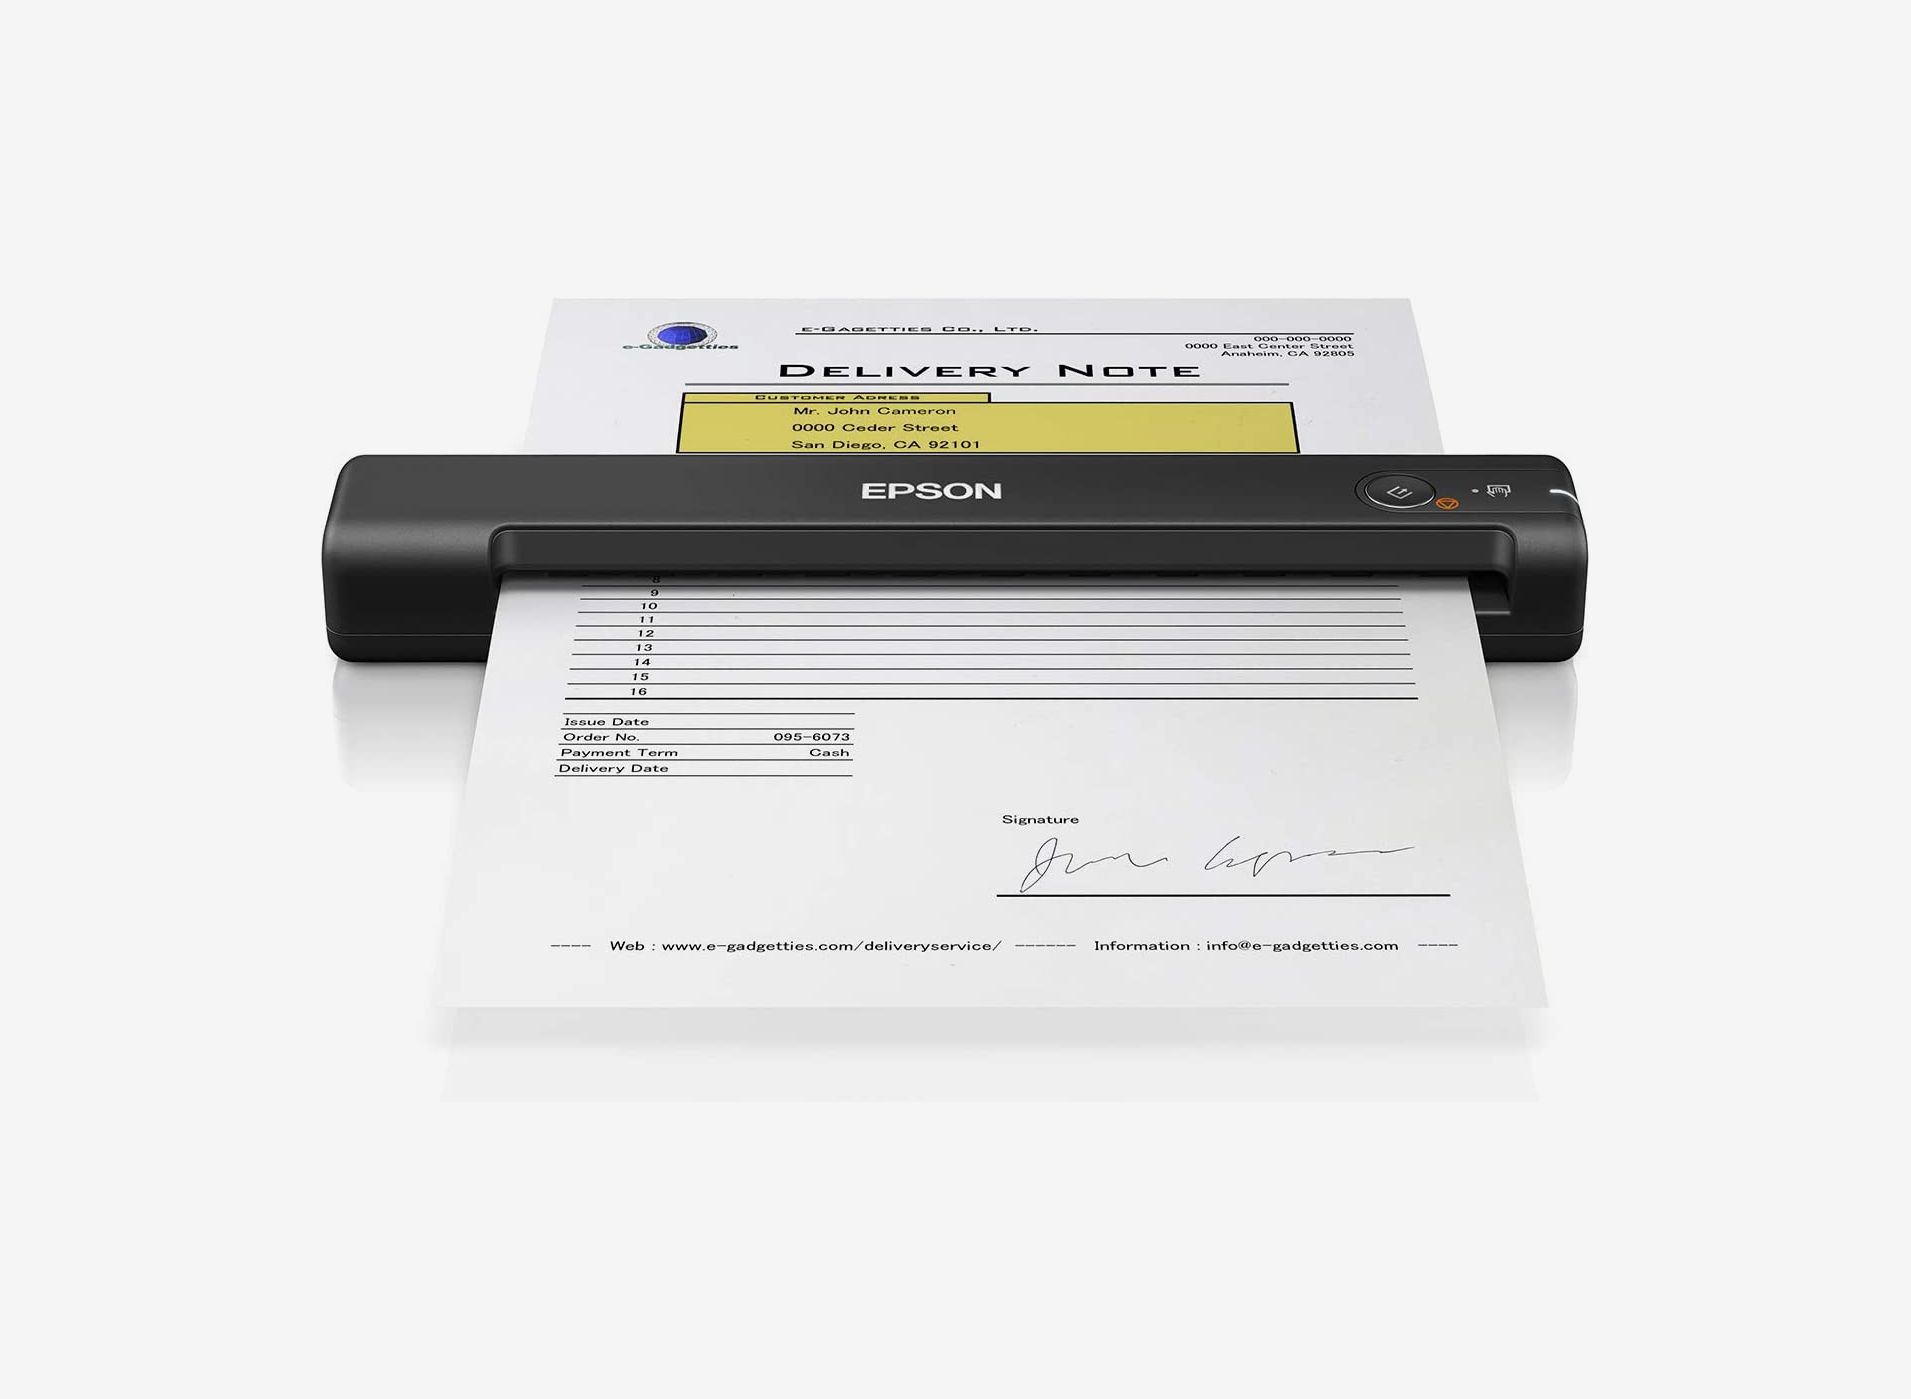 4x6 photo scanner auto feed